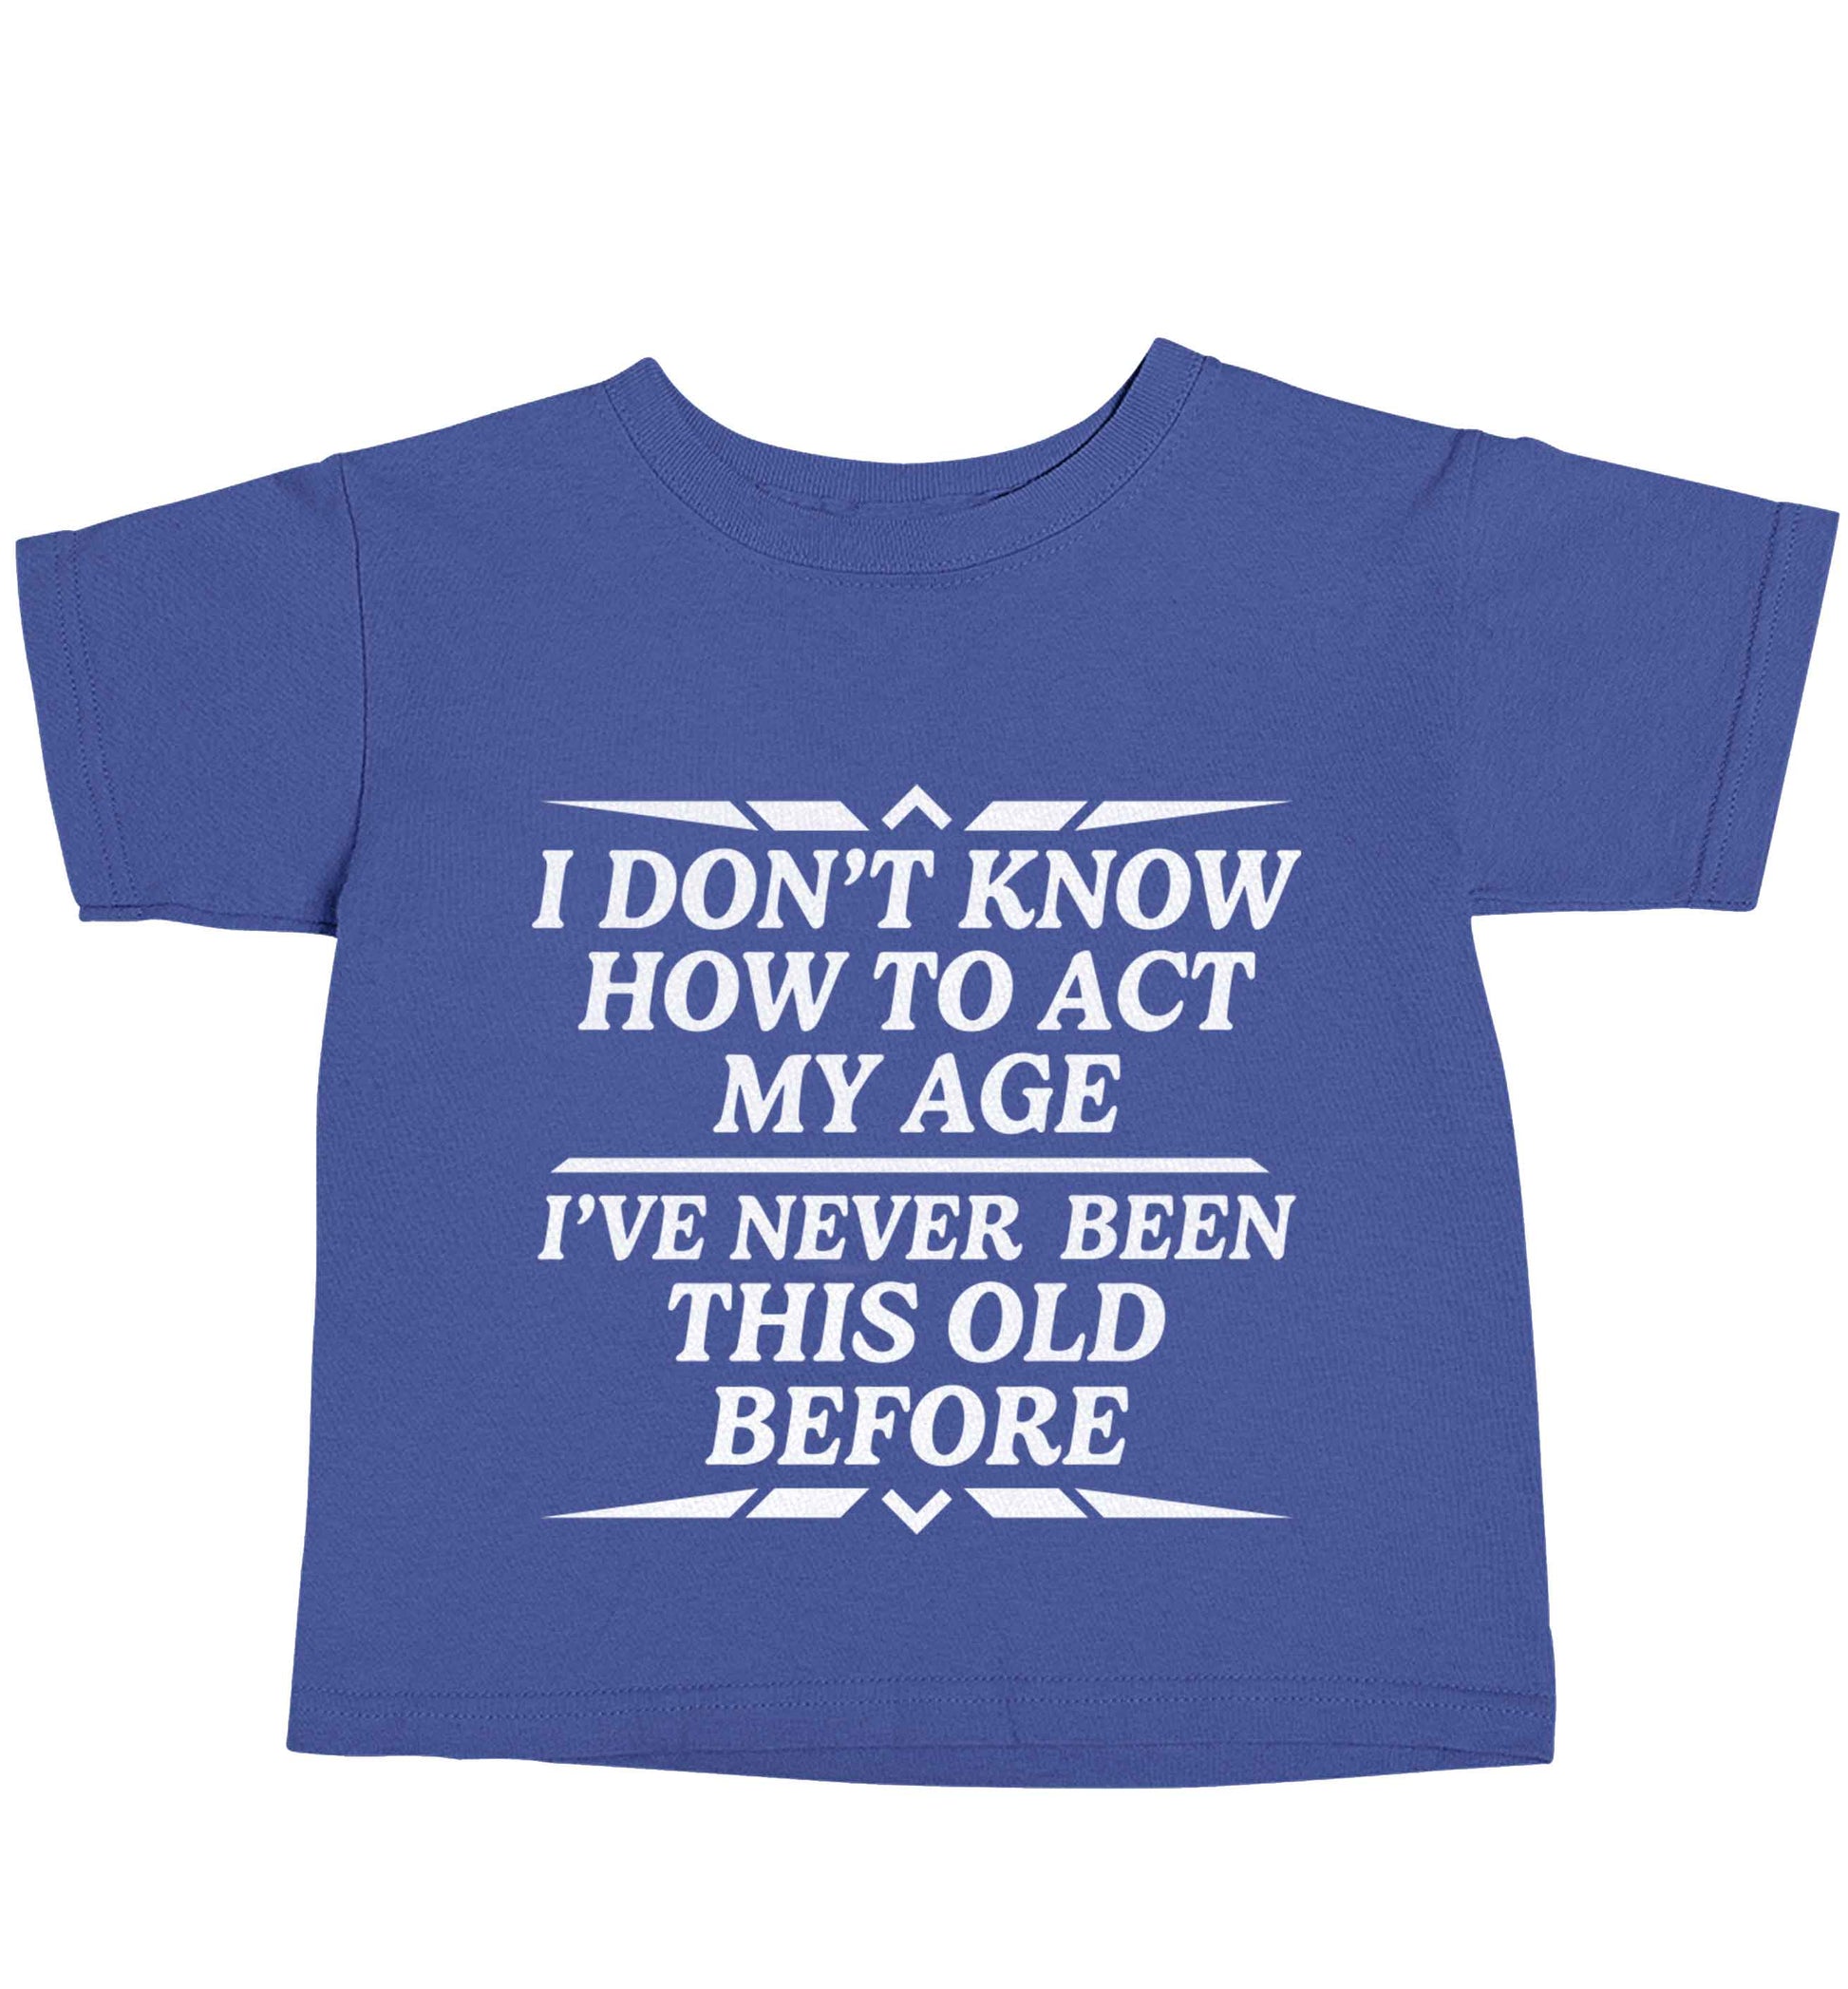 I don't know how to act my age I've never been this old before blue baby toddler Tshirt 2 Years